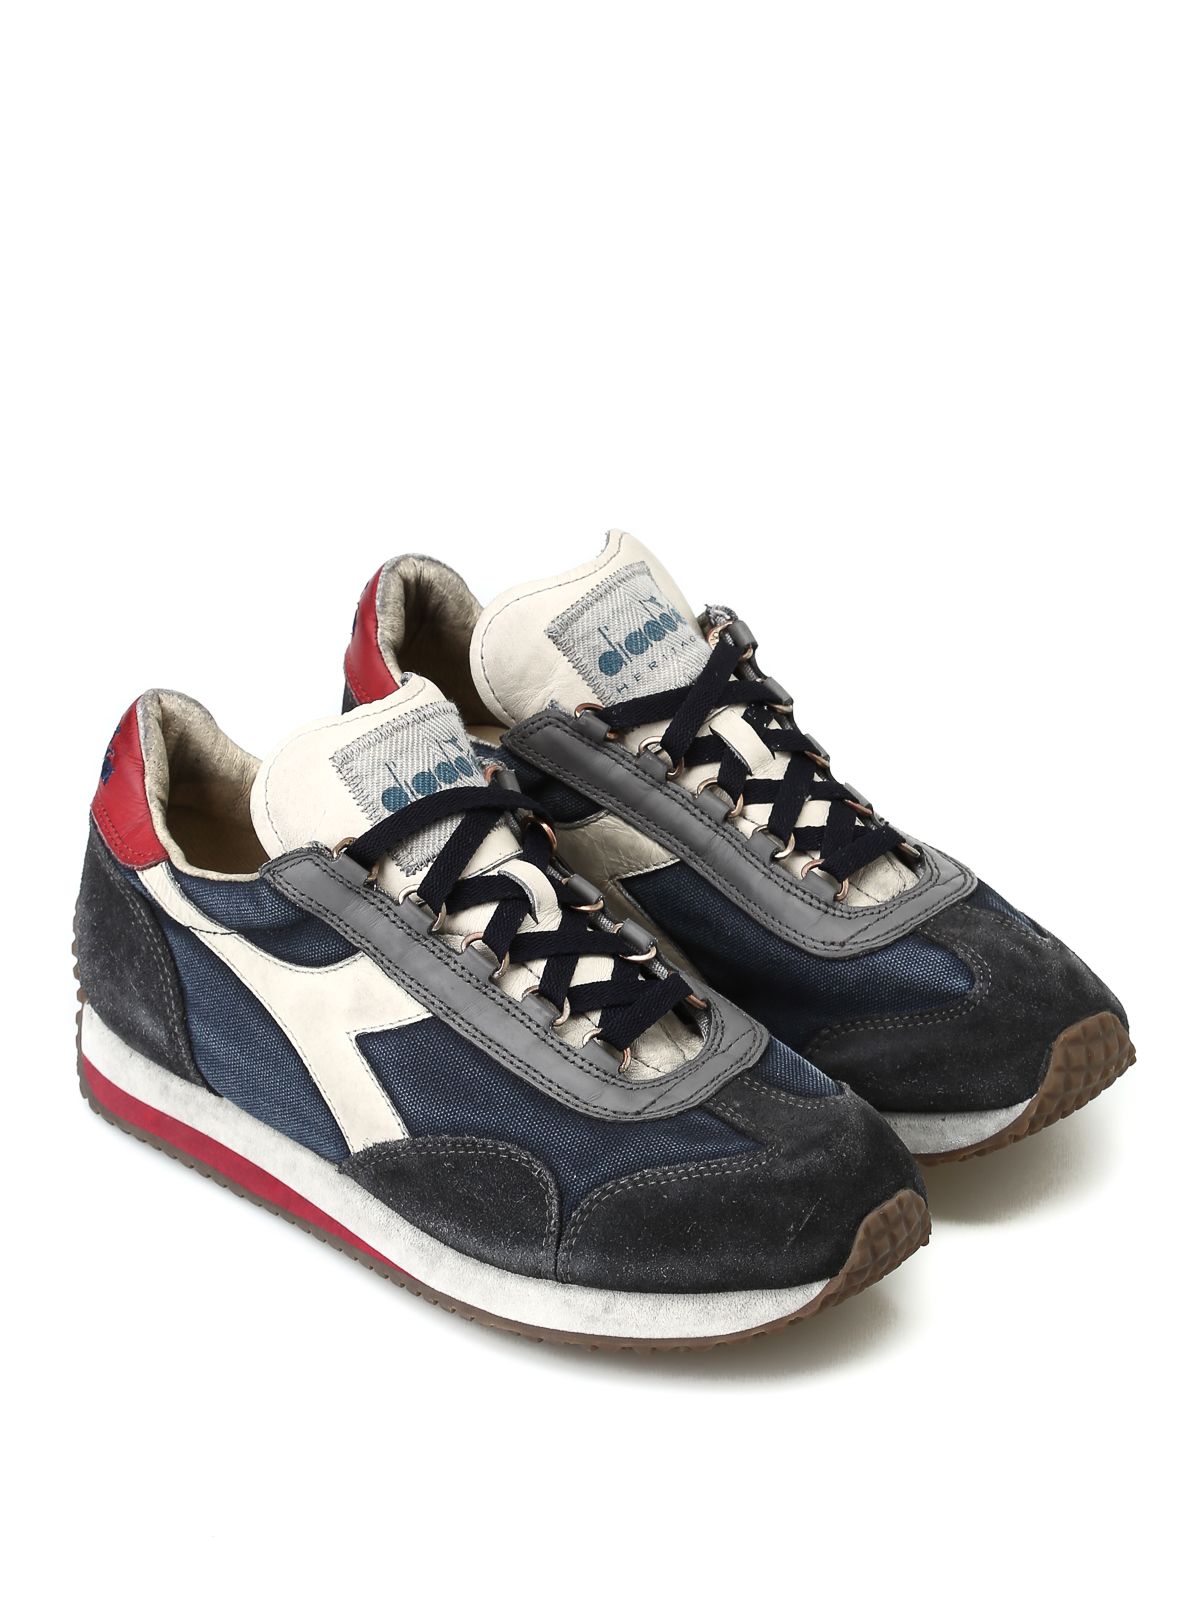 Diadora Heritage Equipe Sw Dirty Evo Sneakers Trainers c7665